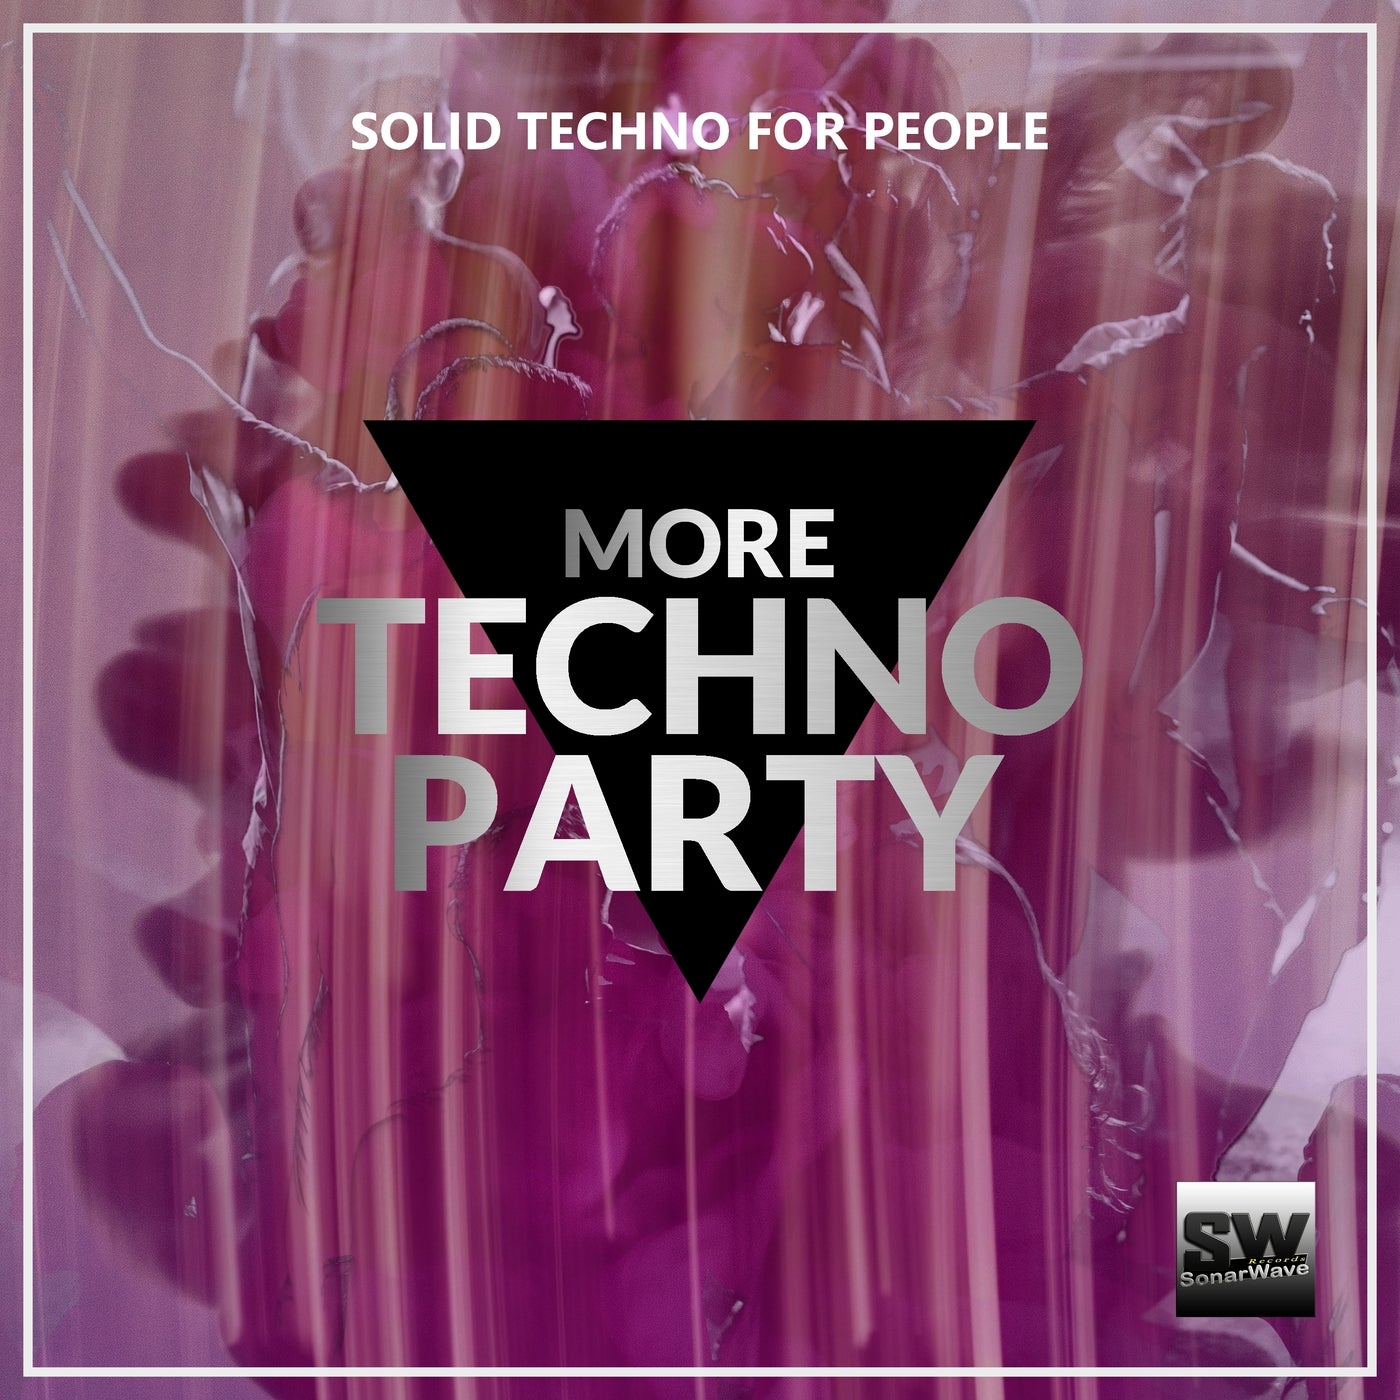 More Techno Party (Solid Techno For People)